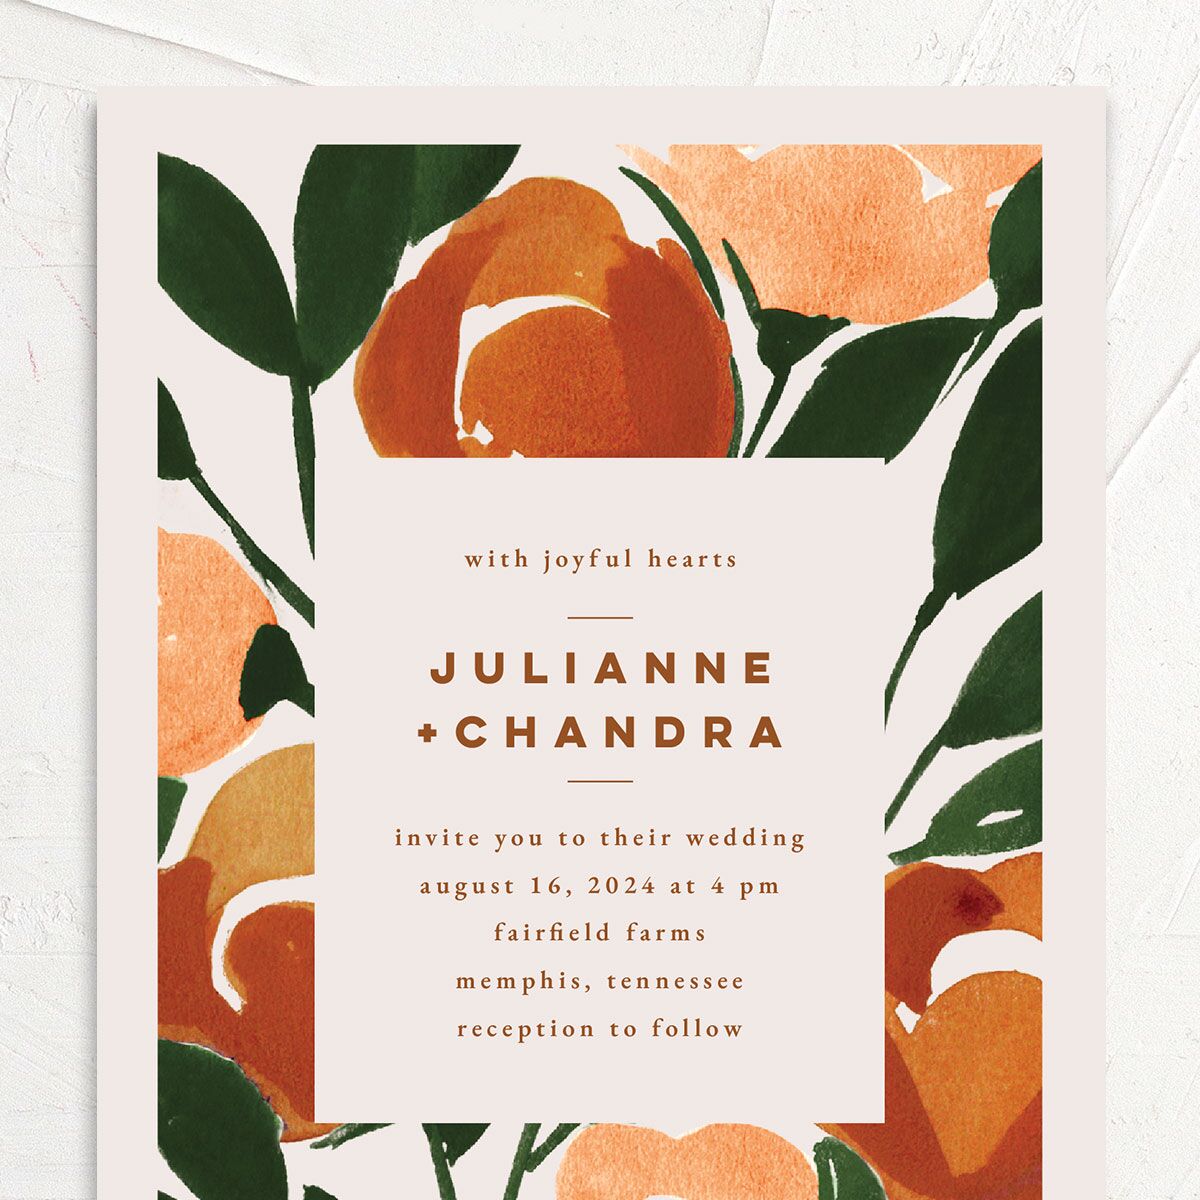 Modern Floral Wedding Invitations | The Knot